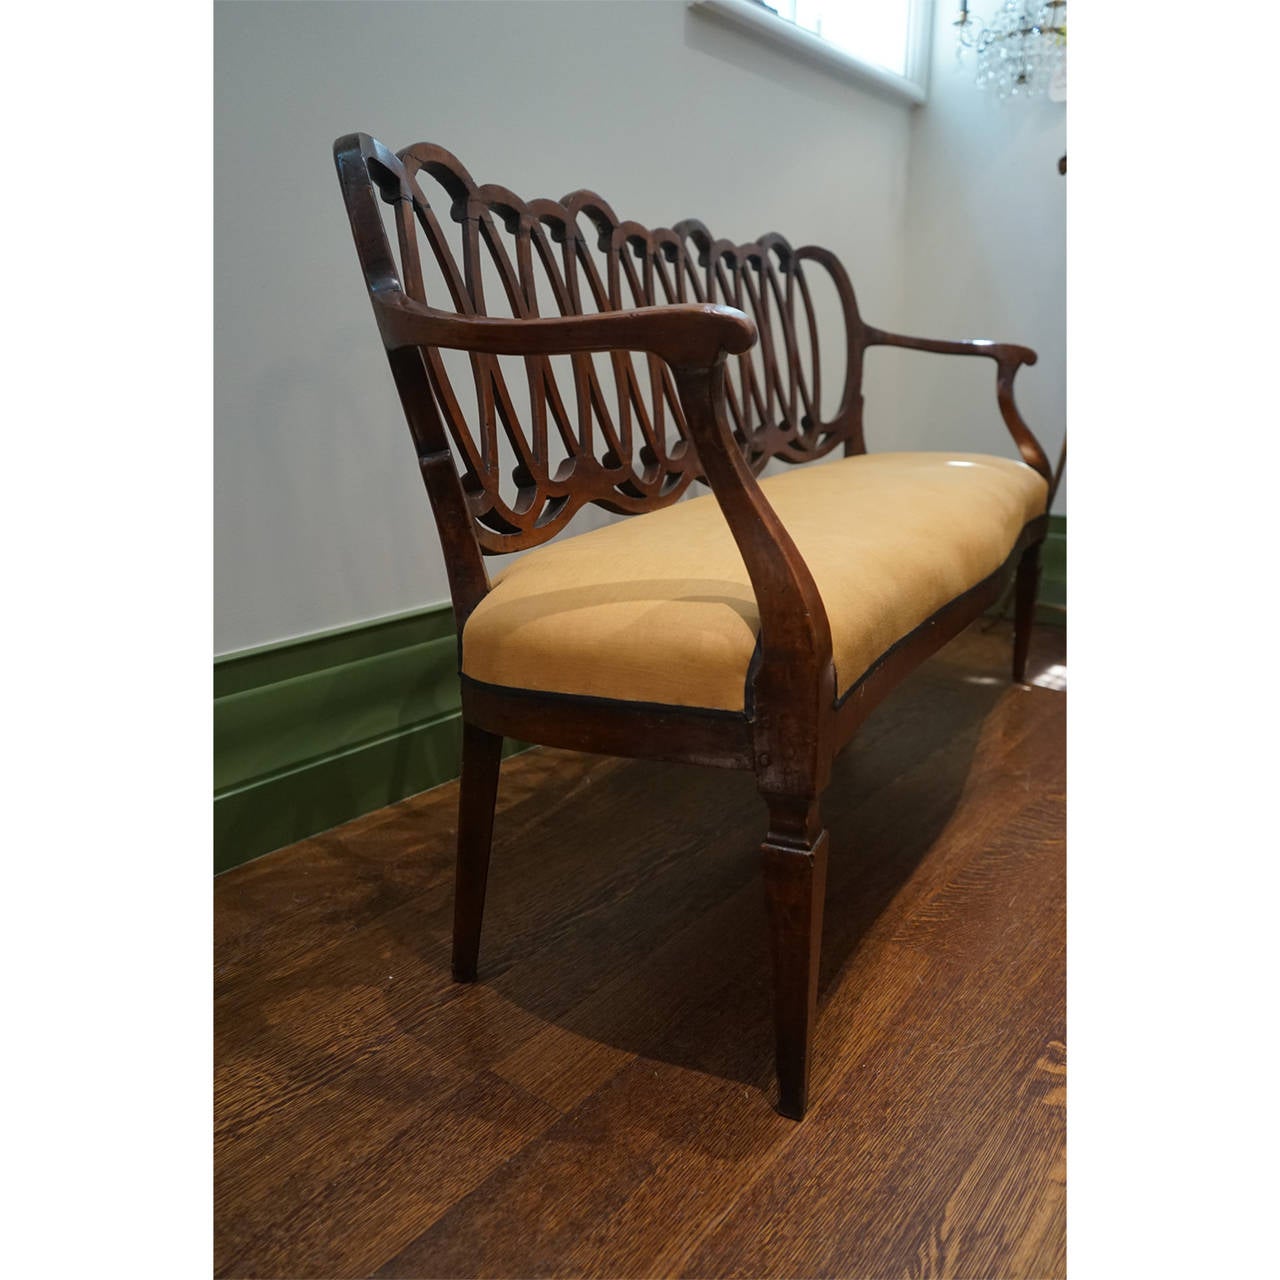 Italian neoclassical carved walnut settee with graphic infinity loop back. Newly upholstered in linen with grosgrain trim.